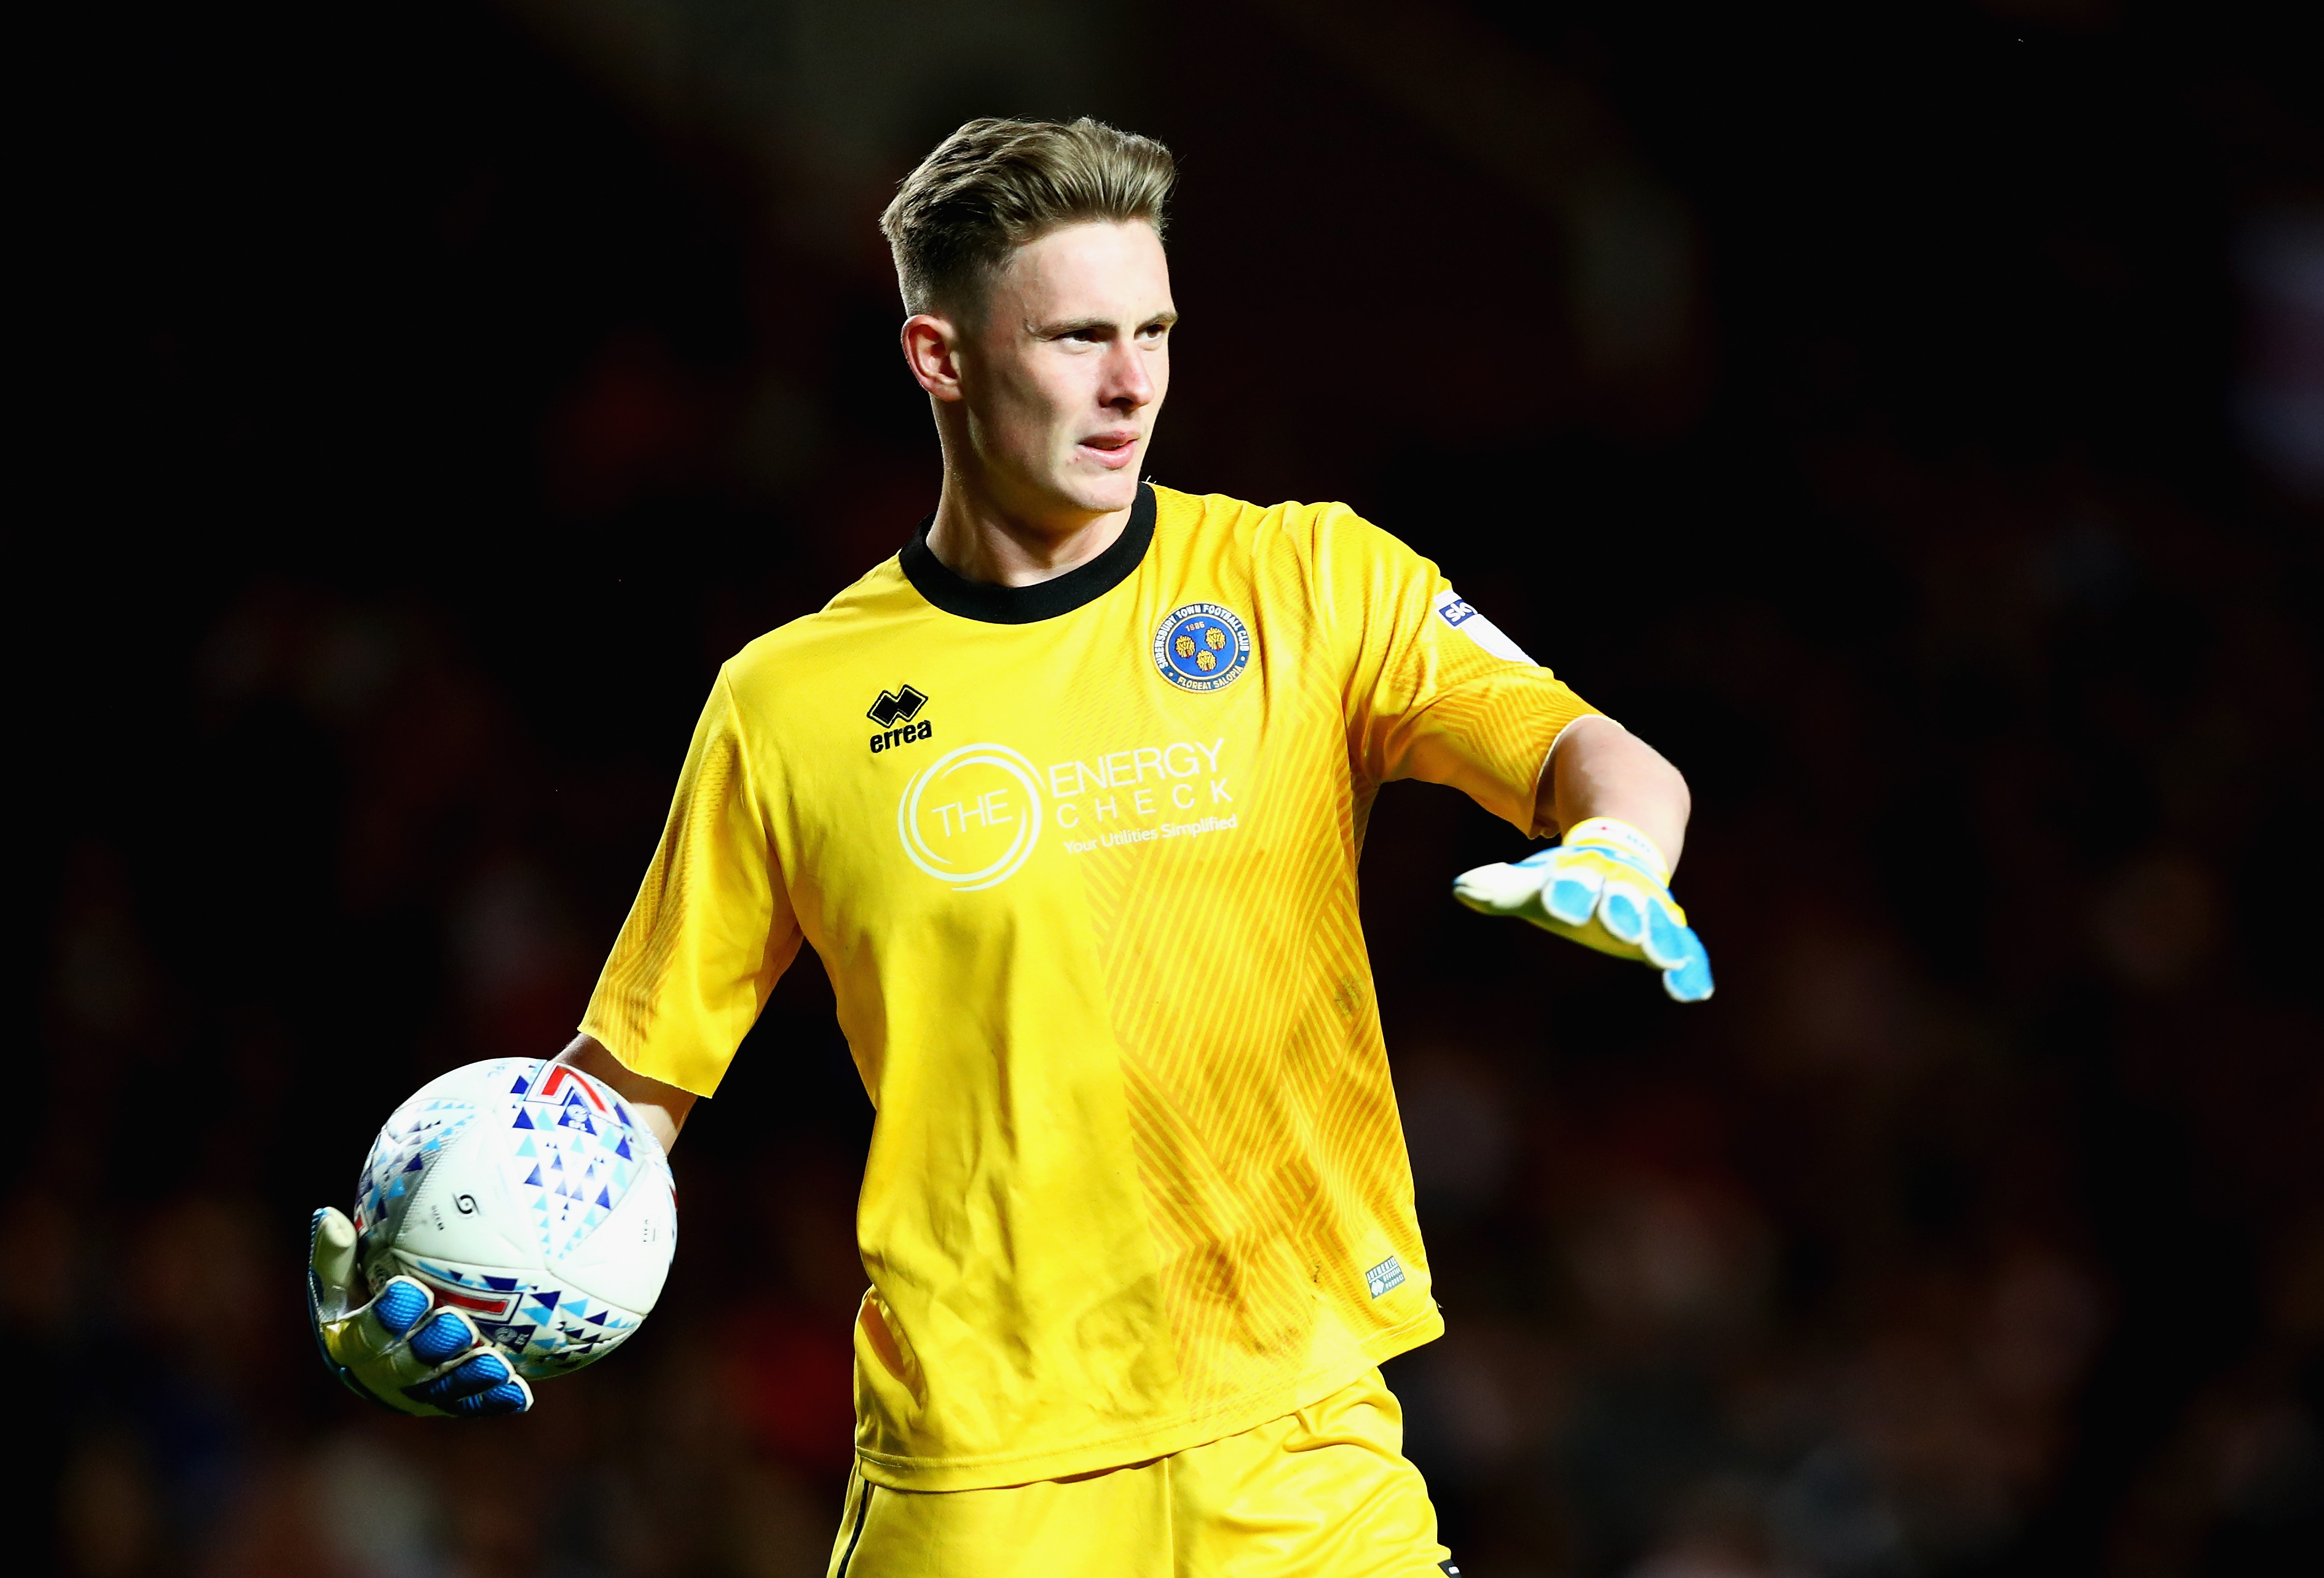 LONDON, ENGLAND - MAY 10:  Dean Henderson of Shrewsbury Town in action during the Sky Bet League One Play Off Semi Final First Leg match between Charlton Athletic and Shrewsbury Town at The Valley on May 10, 2018 in London, England.  (Photo by Naomi Baker/Getty Images)